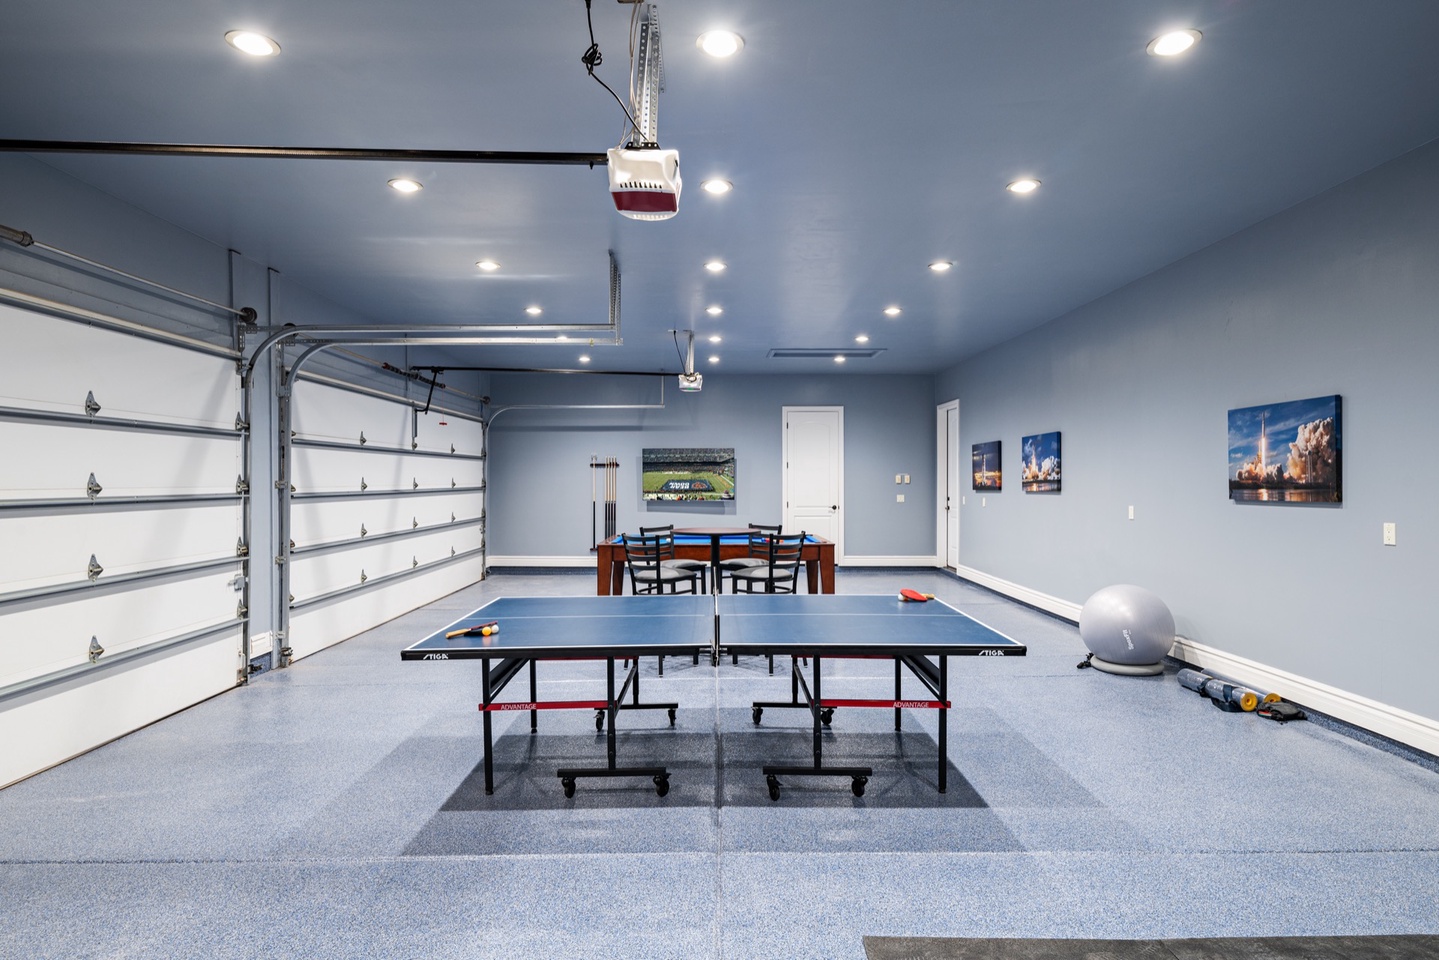 Ping pong, pool, TV's, and workout equipment